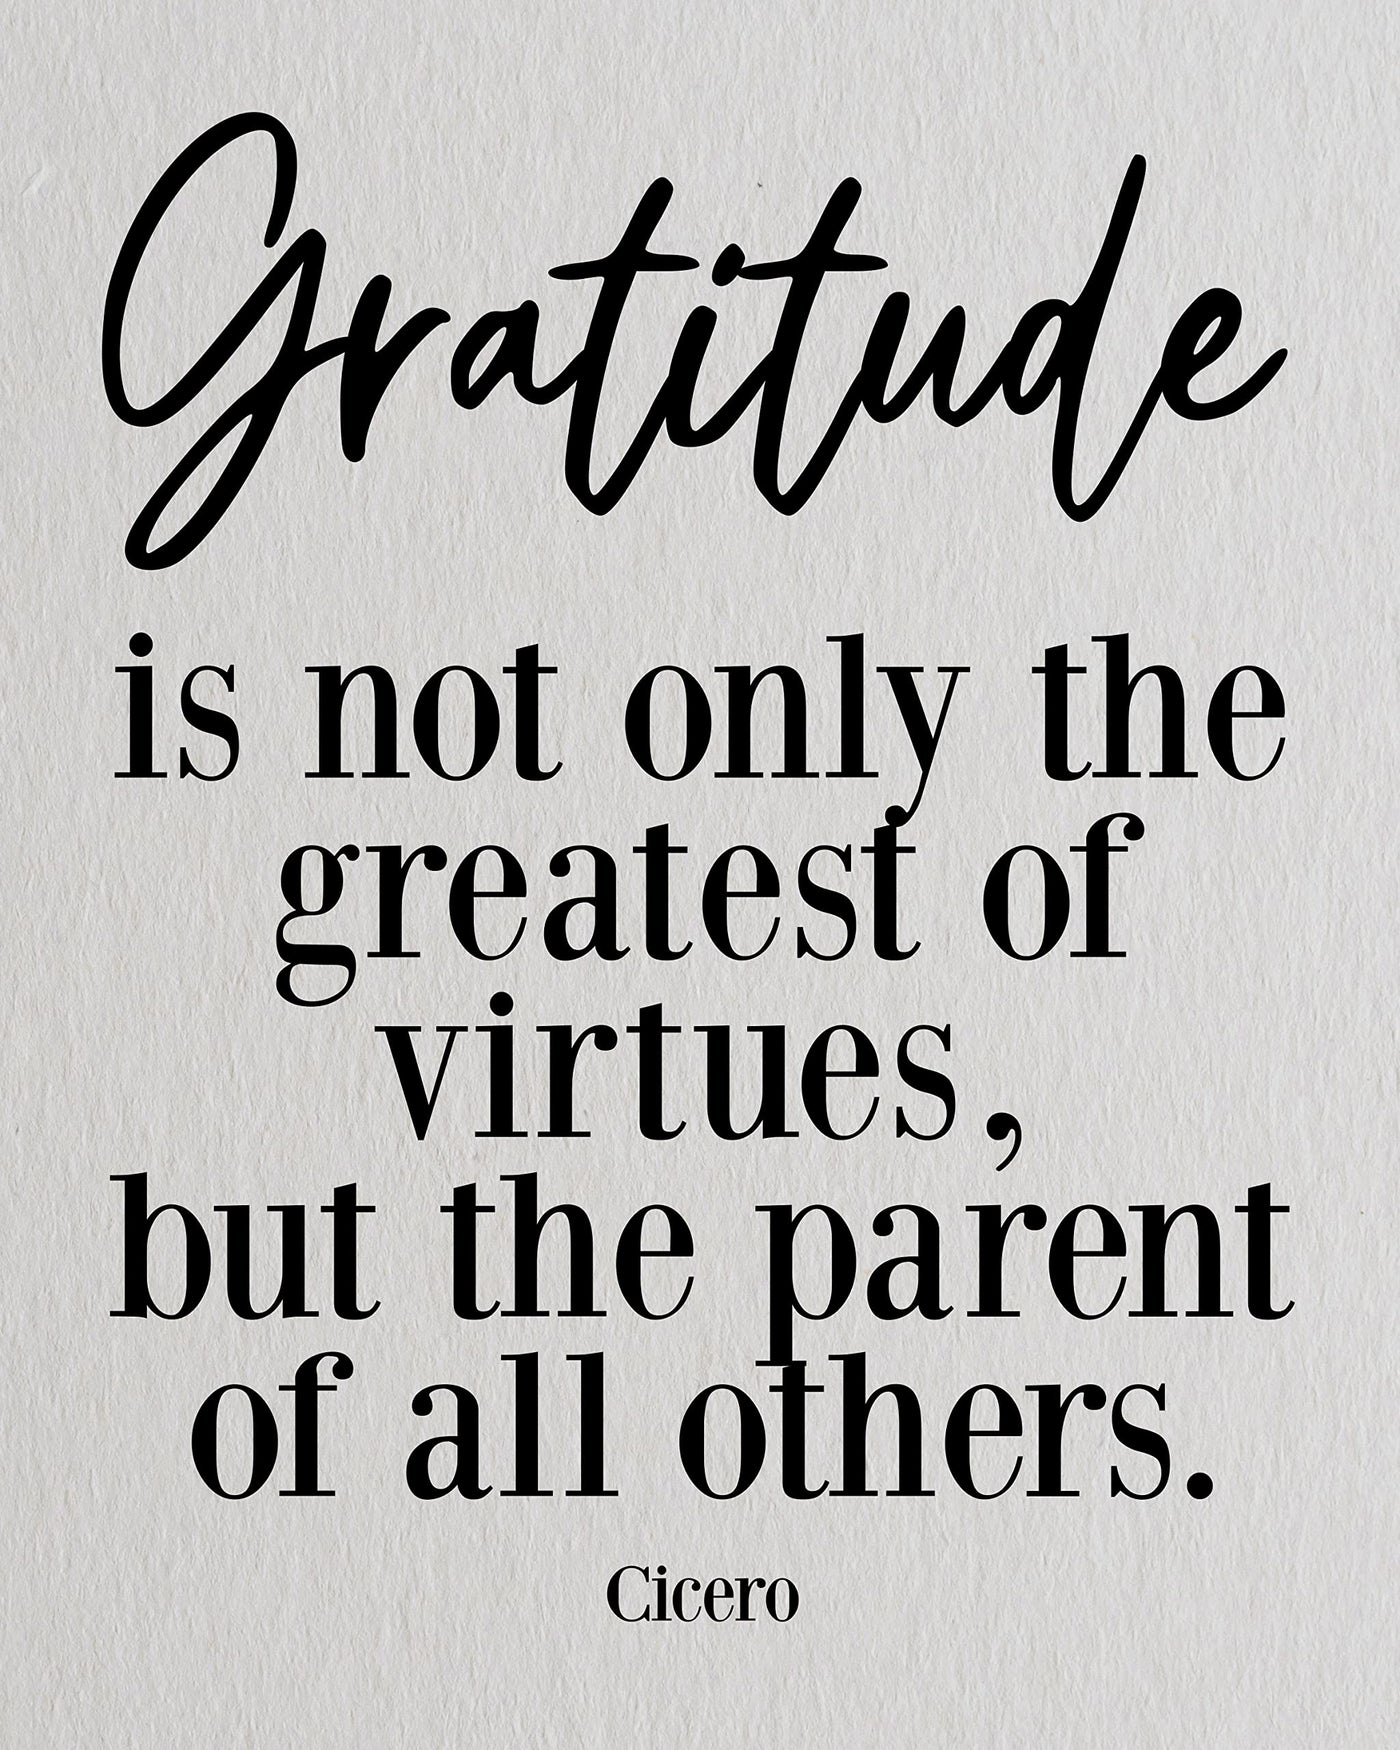 Gratitude-The Greatest of Virtues-Inspirational Quotes Wall Art- 8 x 10" Rustic Typographic Print-Ready to Frame. Positive Decor for Home-Office-School Decor. Great Reminder to Be Thankful!